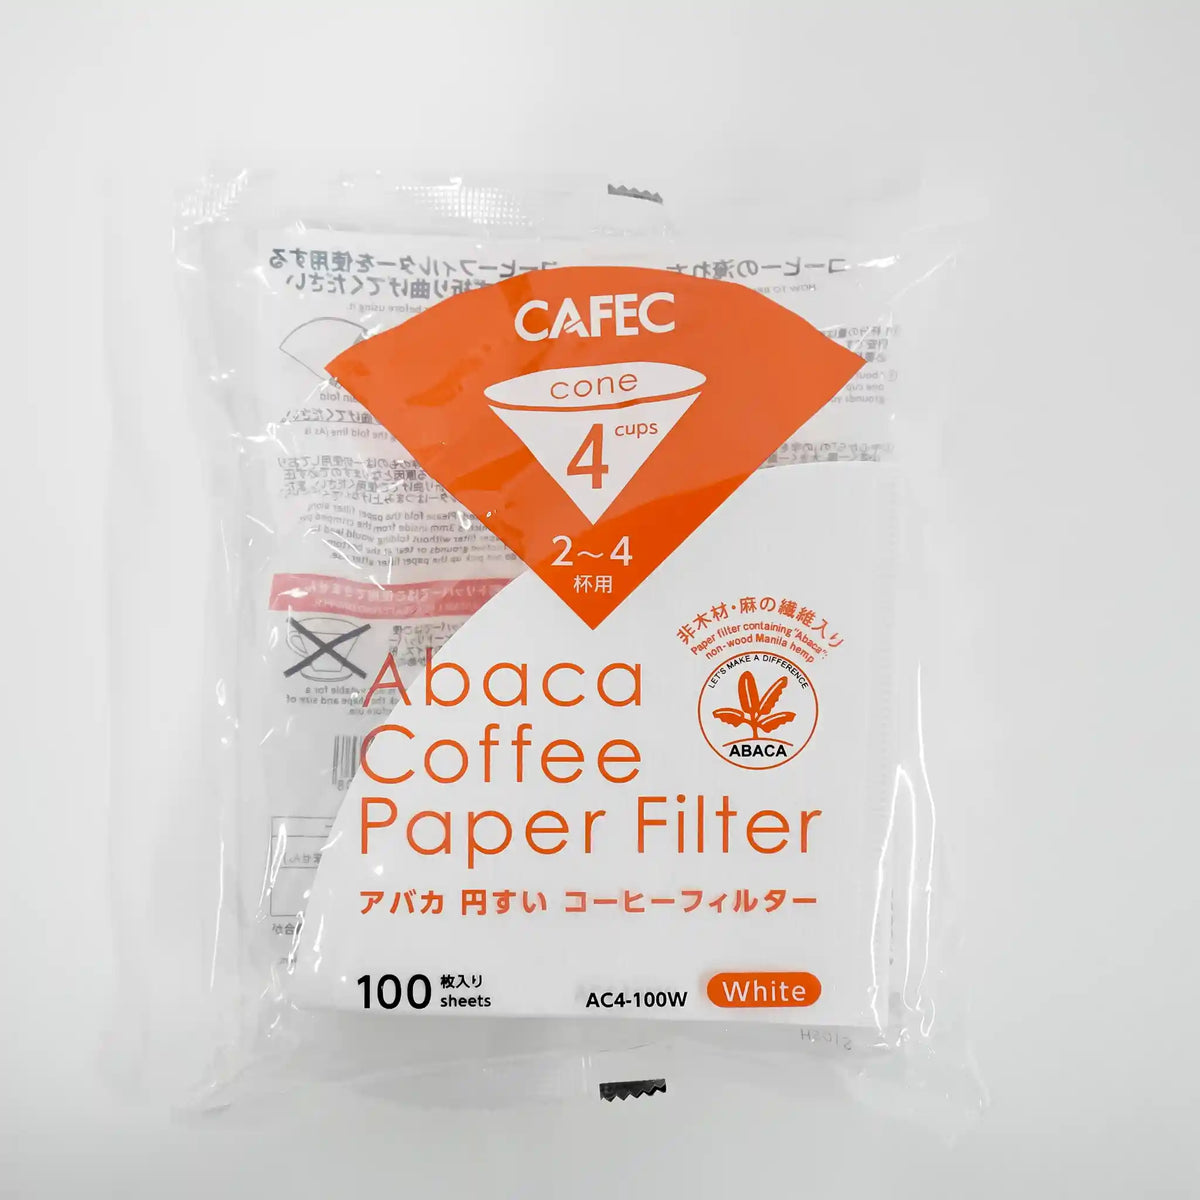 CAFEC Abaca Coffee Paper Filter (Cone-shaped 4 Cups)